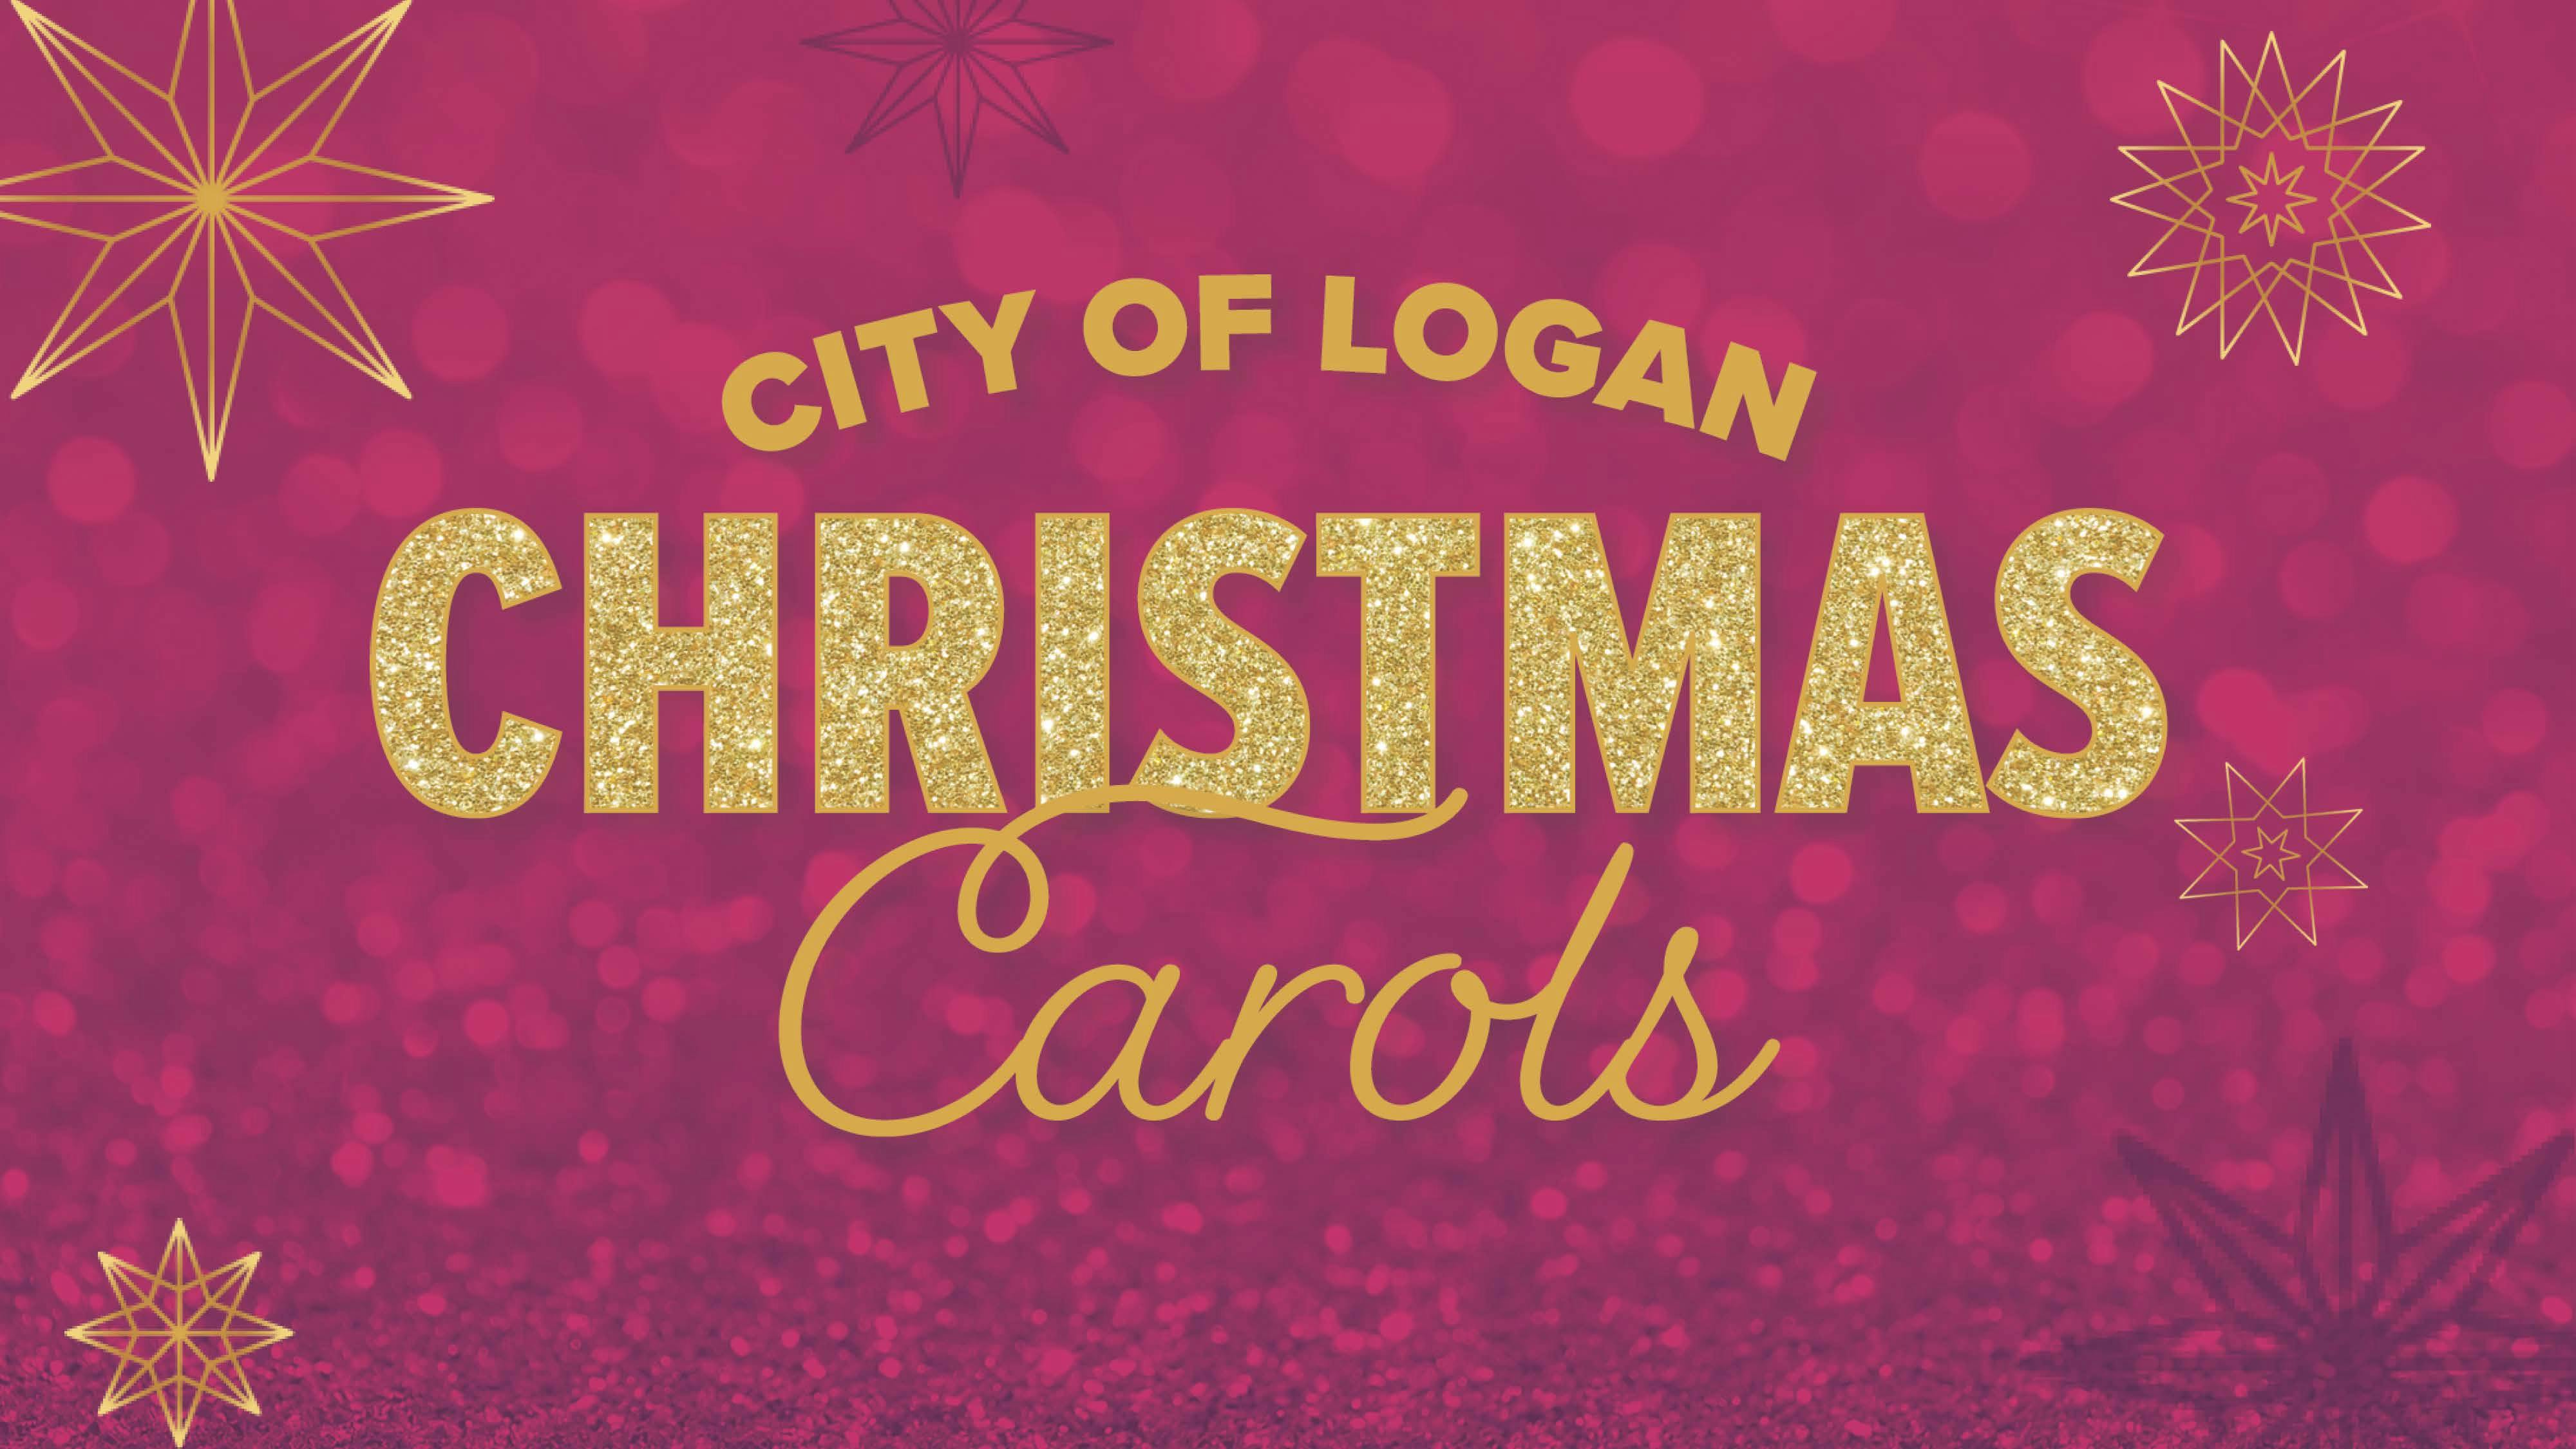 City of Logan Christmas Carols logo featuring gold writing on a pink background